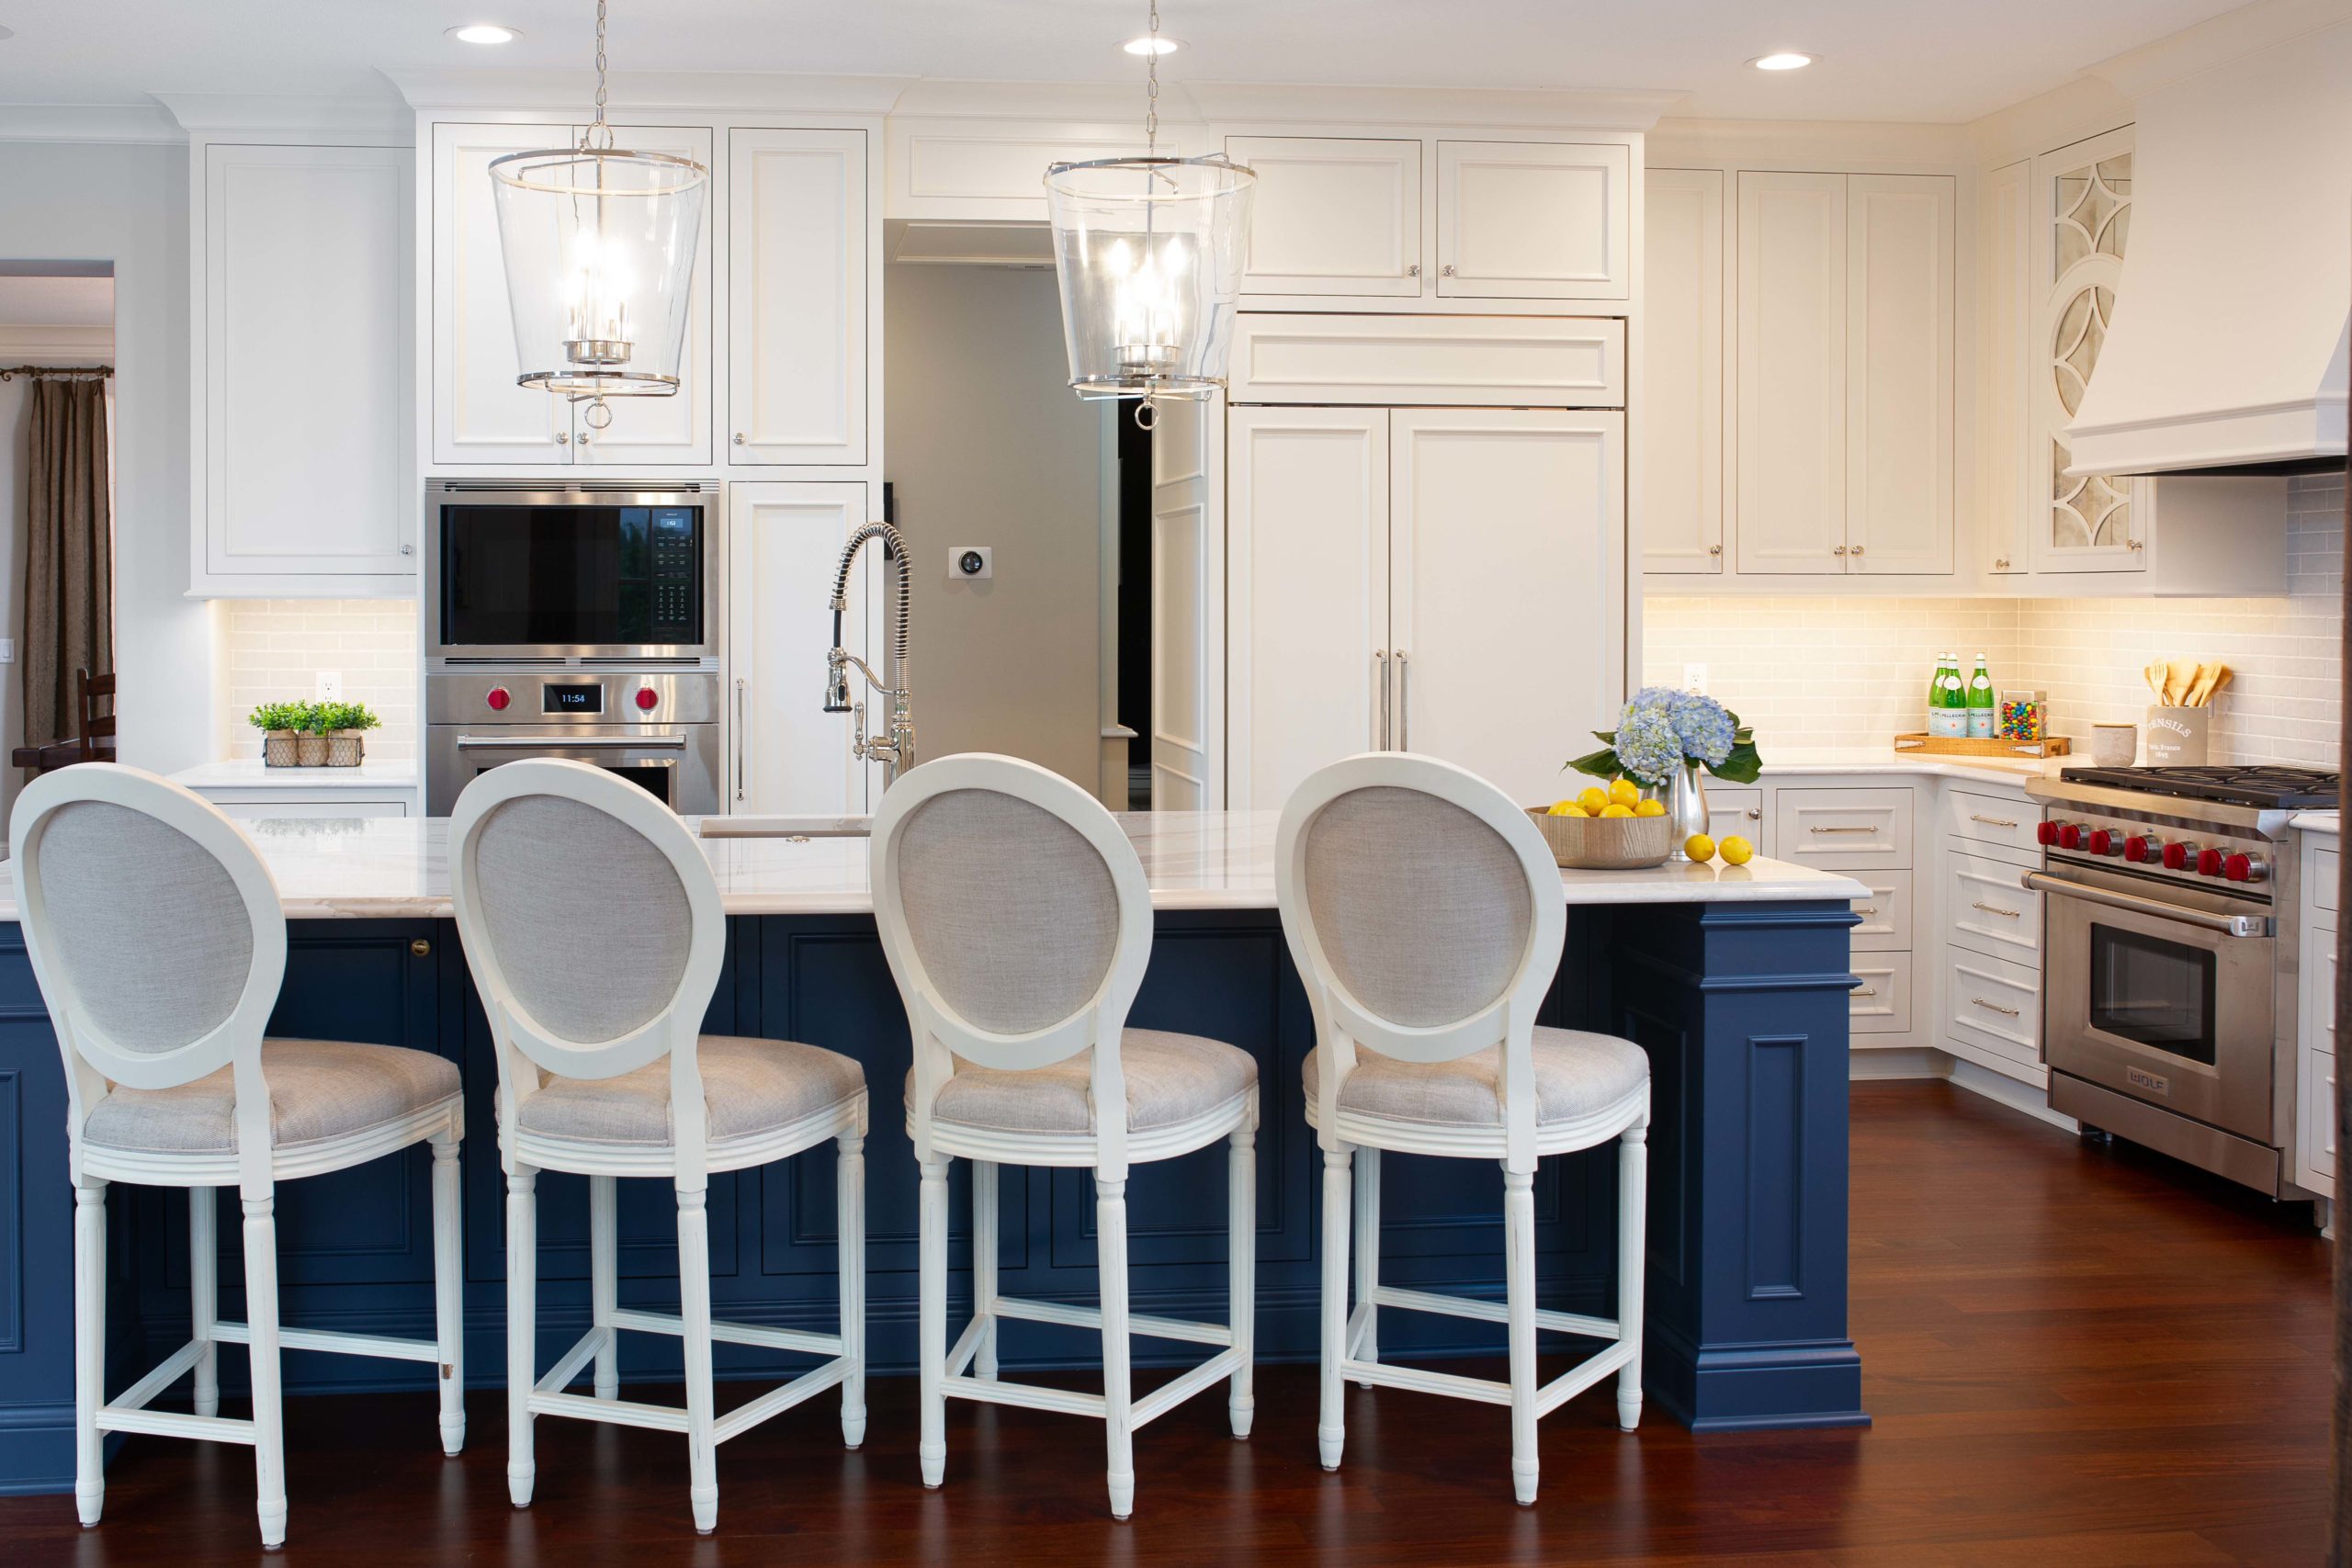 A kitchen with white cabinets and blue counter tops.